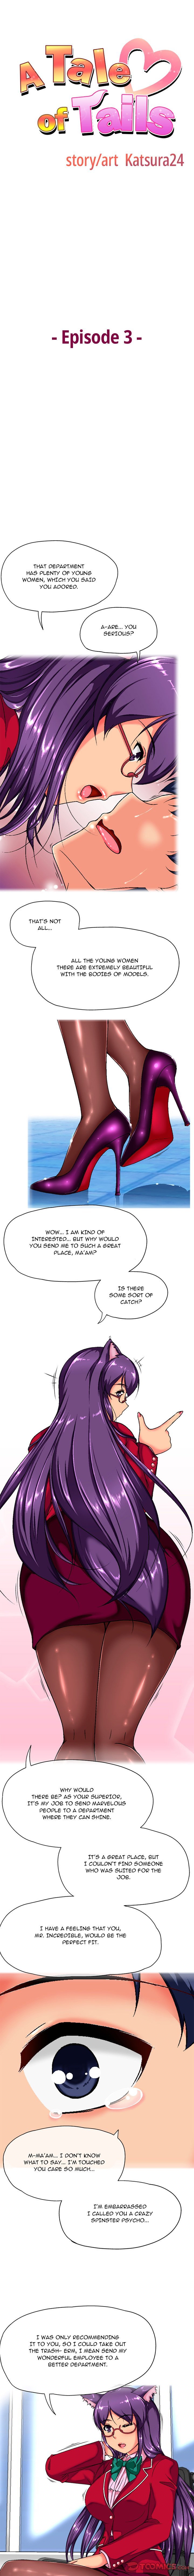 a-tale-of-tails-chap-3-0